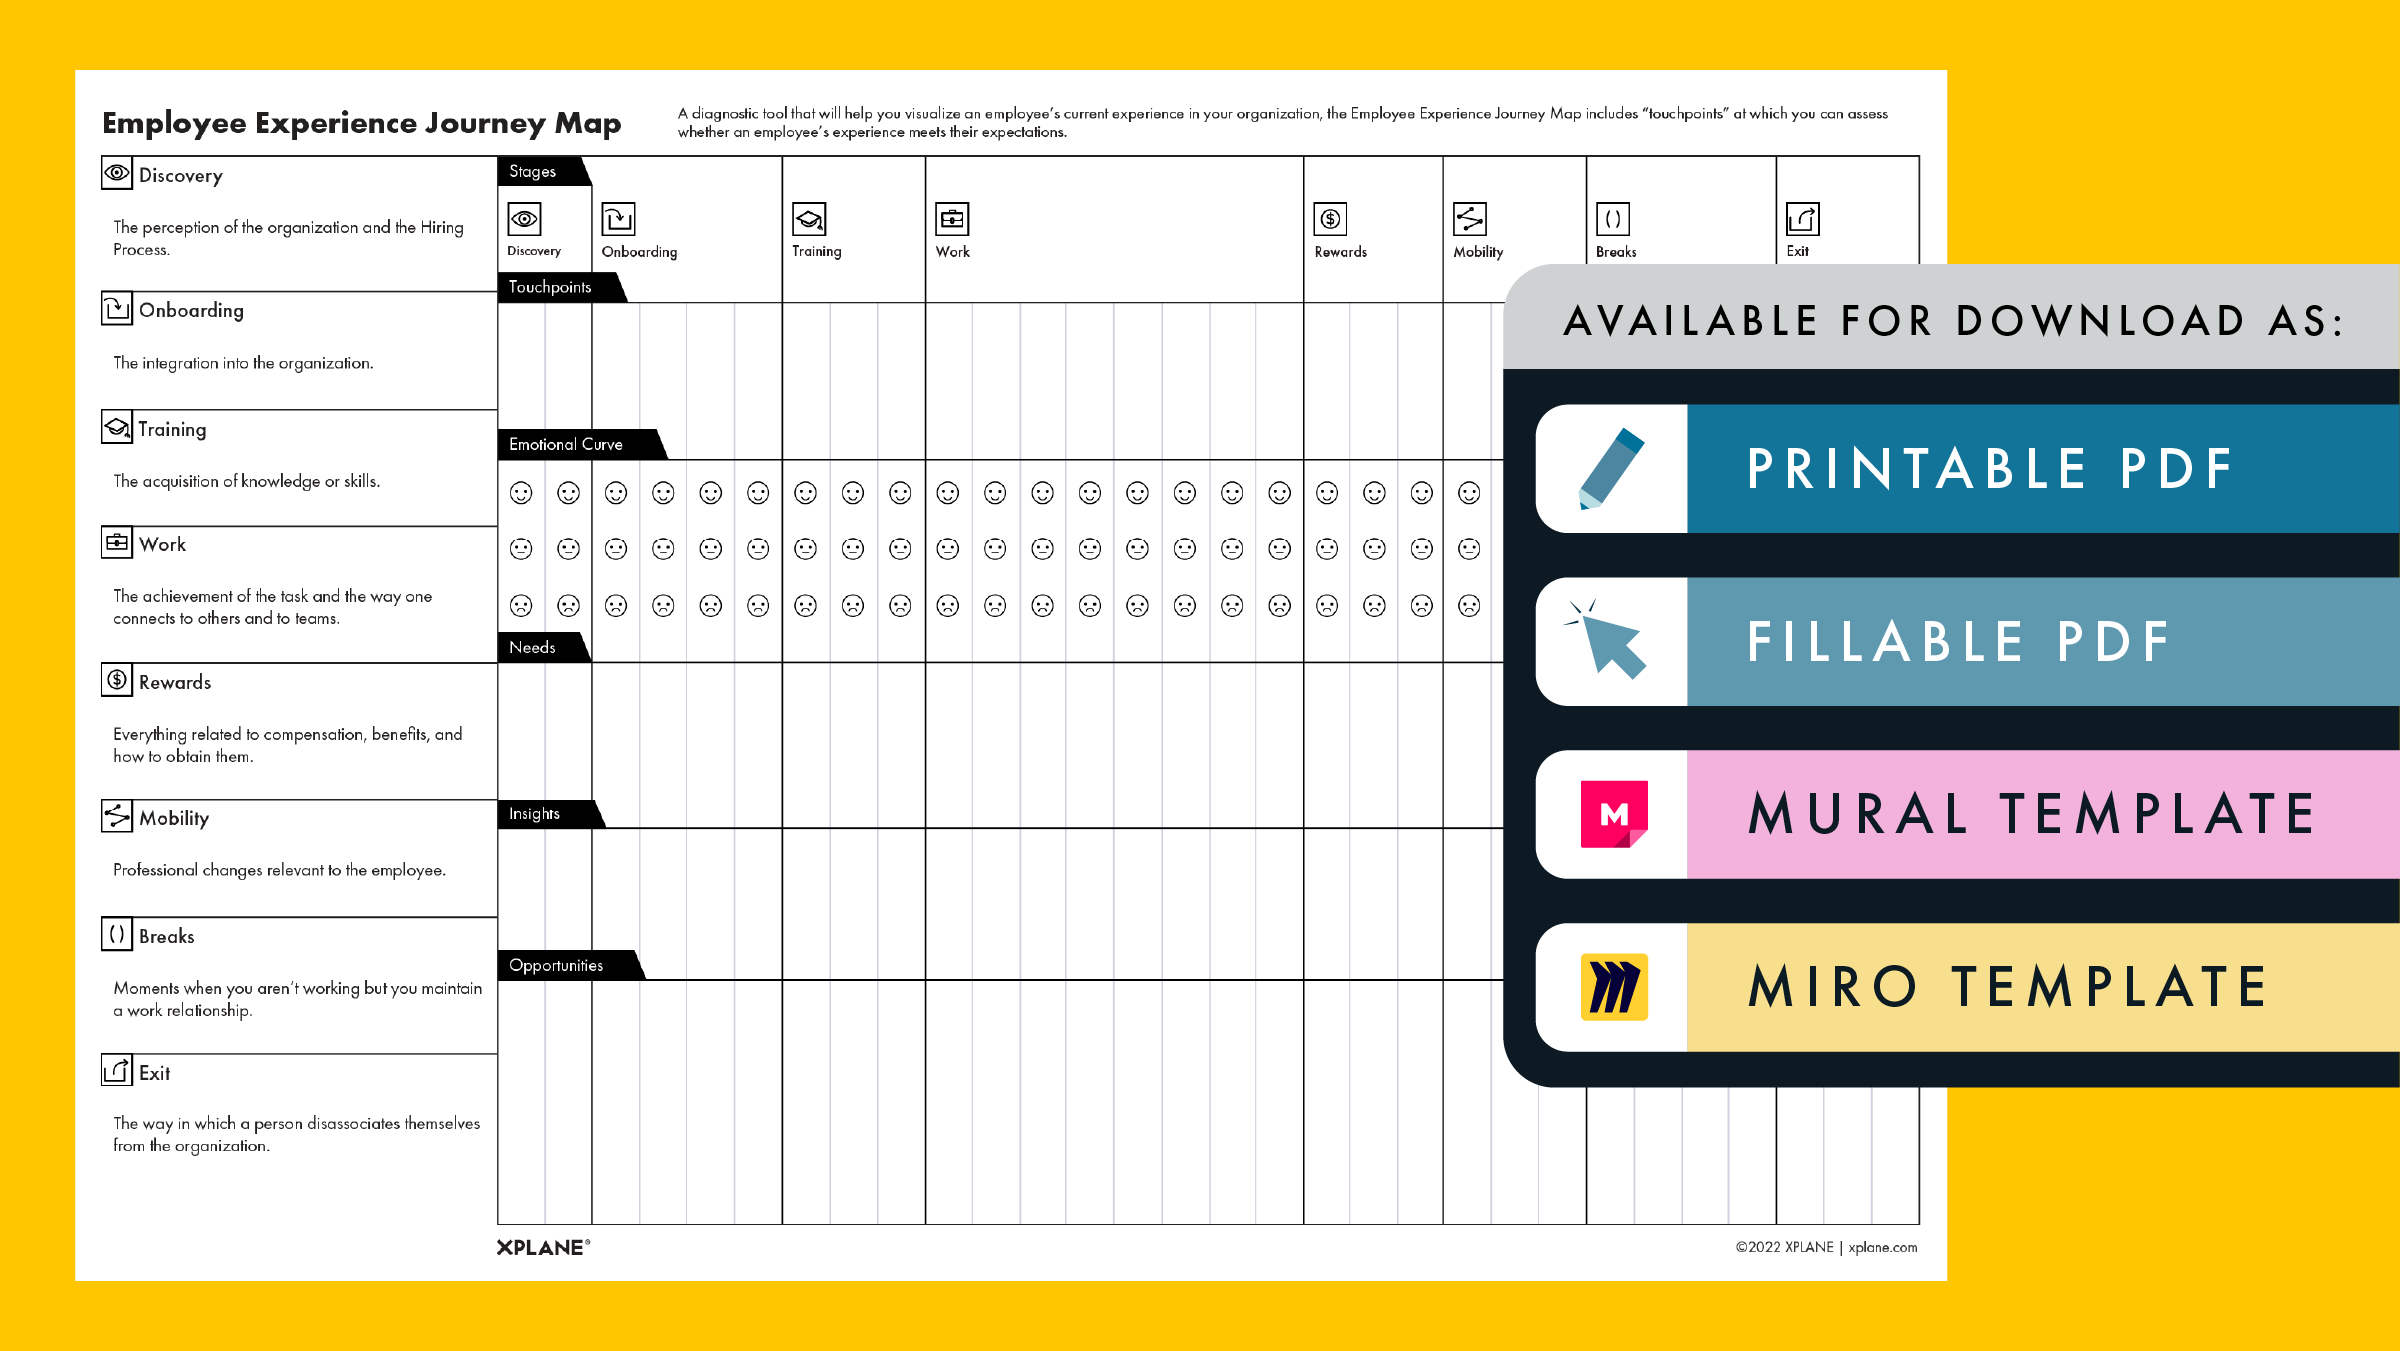 Employee Experience Journey Map worksheet against a yellow background. Four tabs under the header "AVAILABLE FOR DOWNLOAD AS" indicate available file types available.